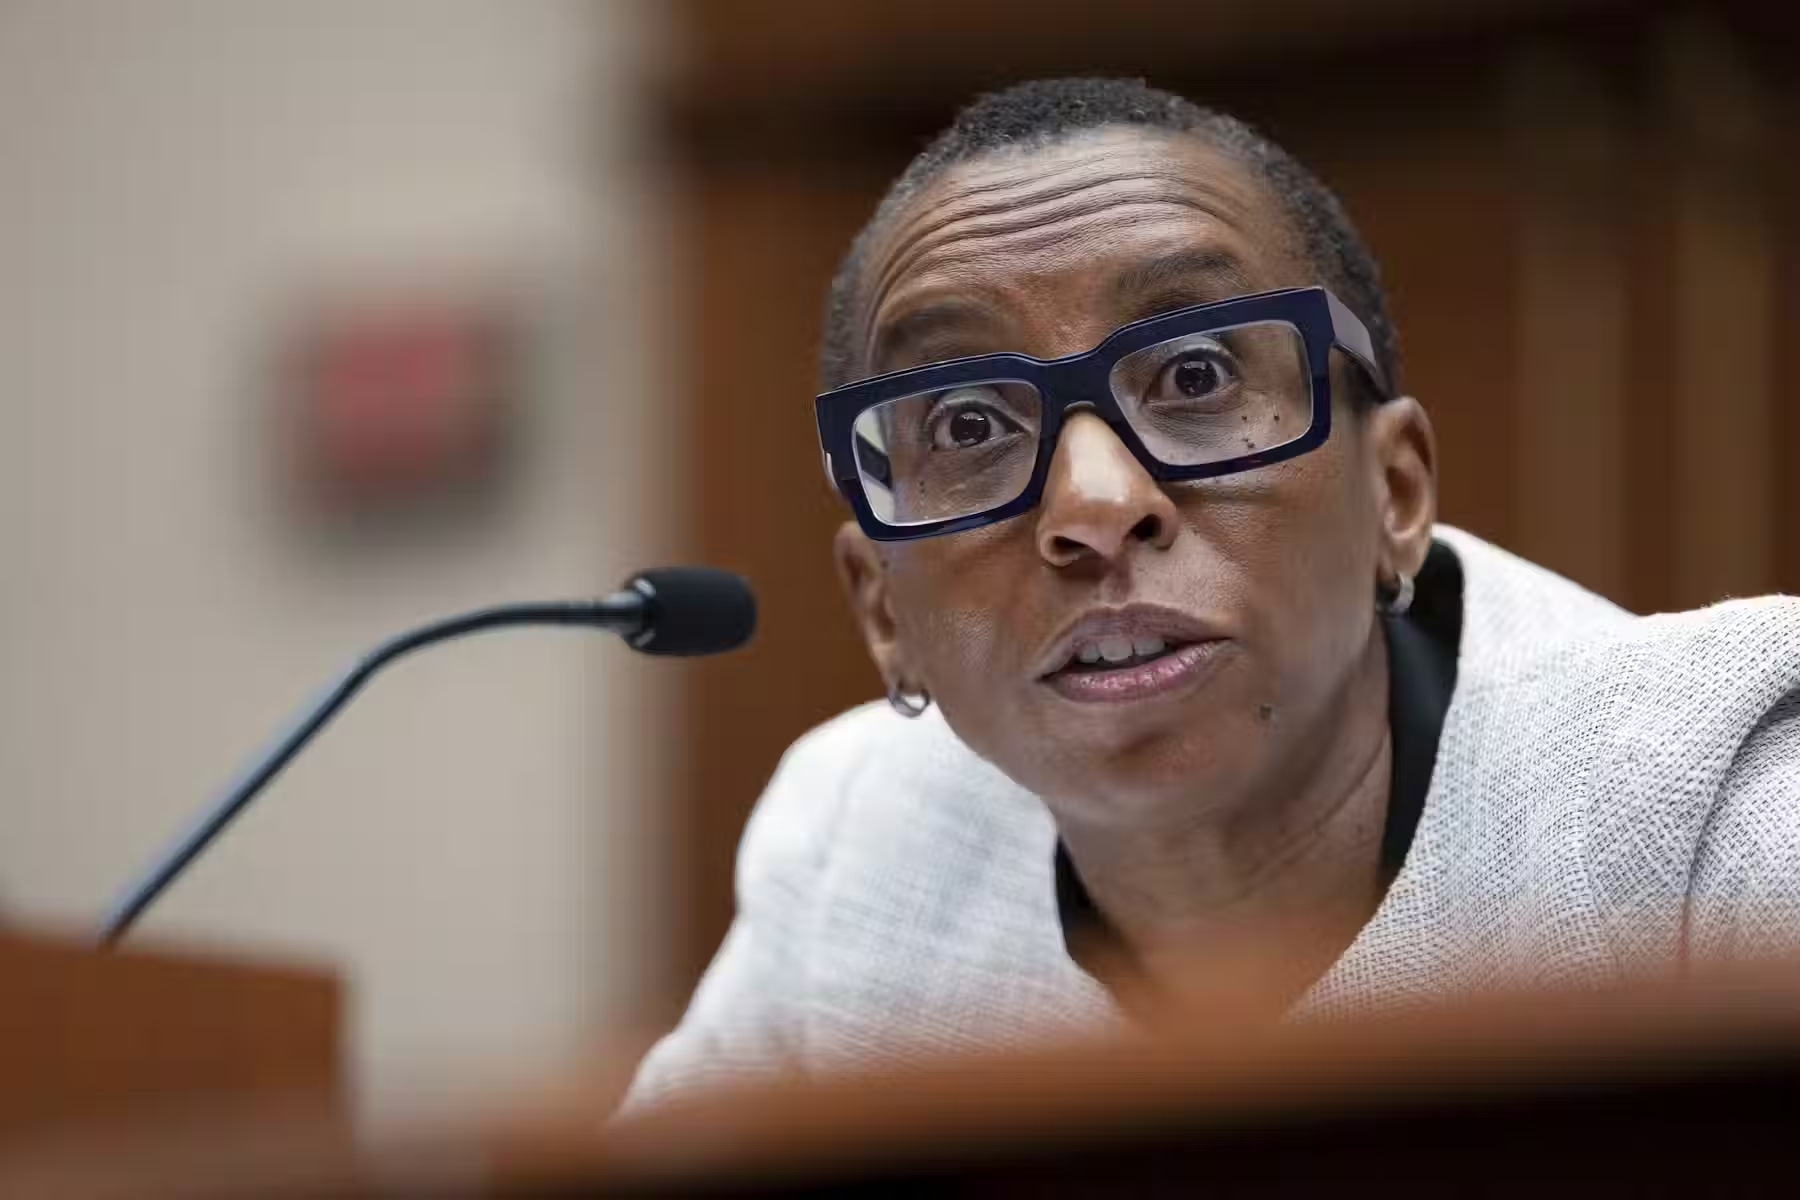 A Black woman with short hair and wearing glasses speaks into a microphone.